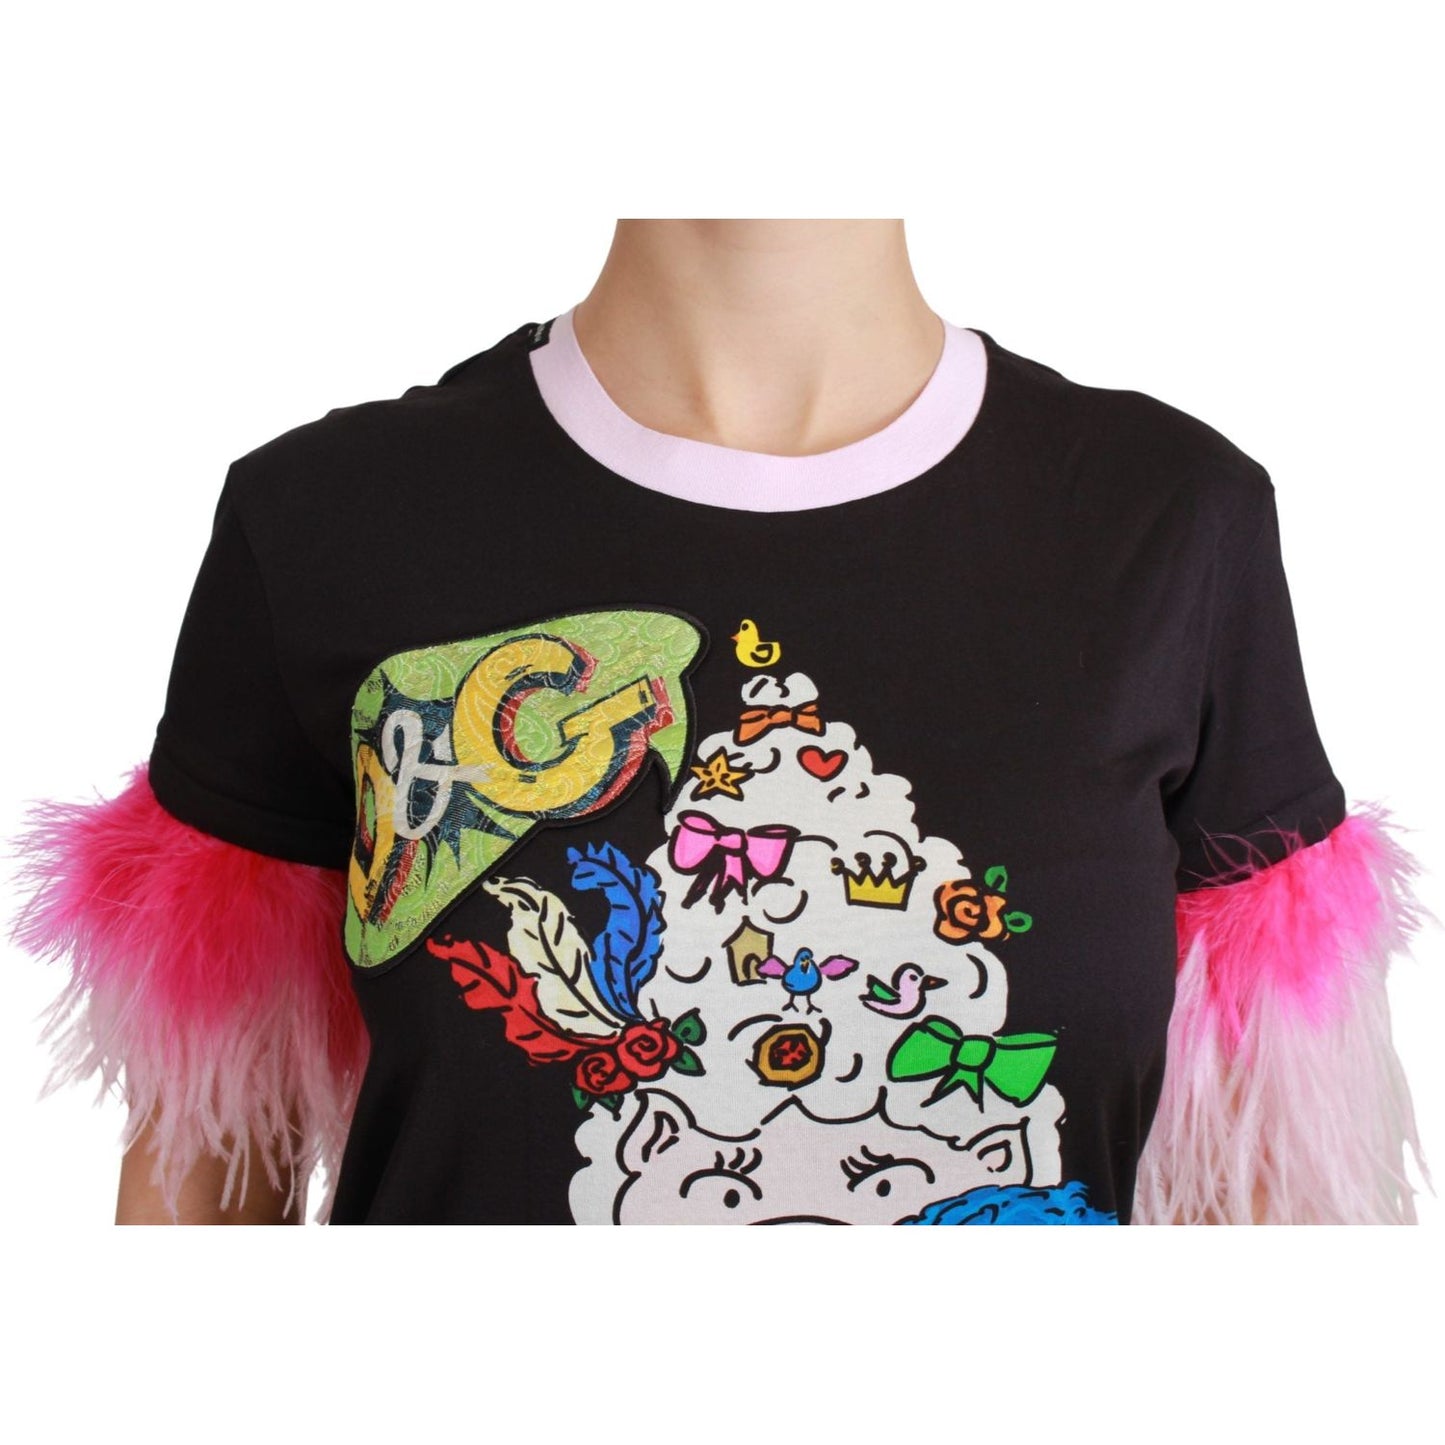 Dolce & Gabbana Chic Crewneck Year of the Pig Motif Tee black-year-of-the-pig-top-cotton-t-shirt